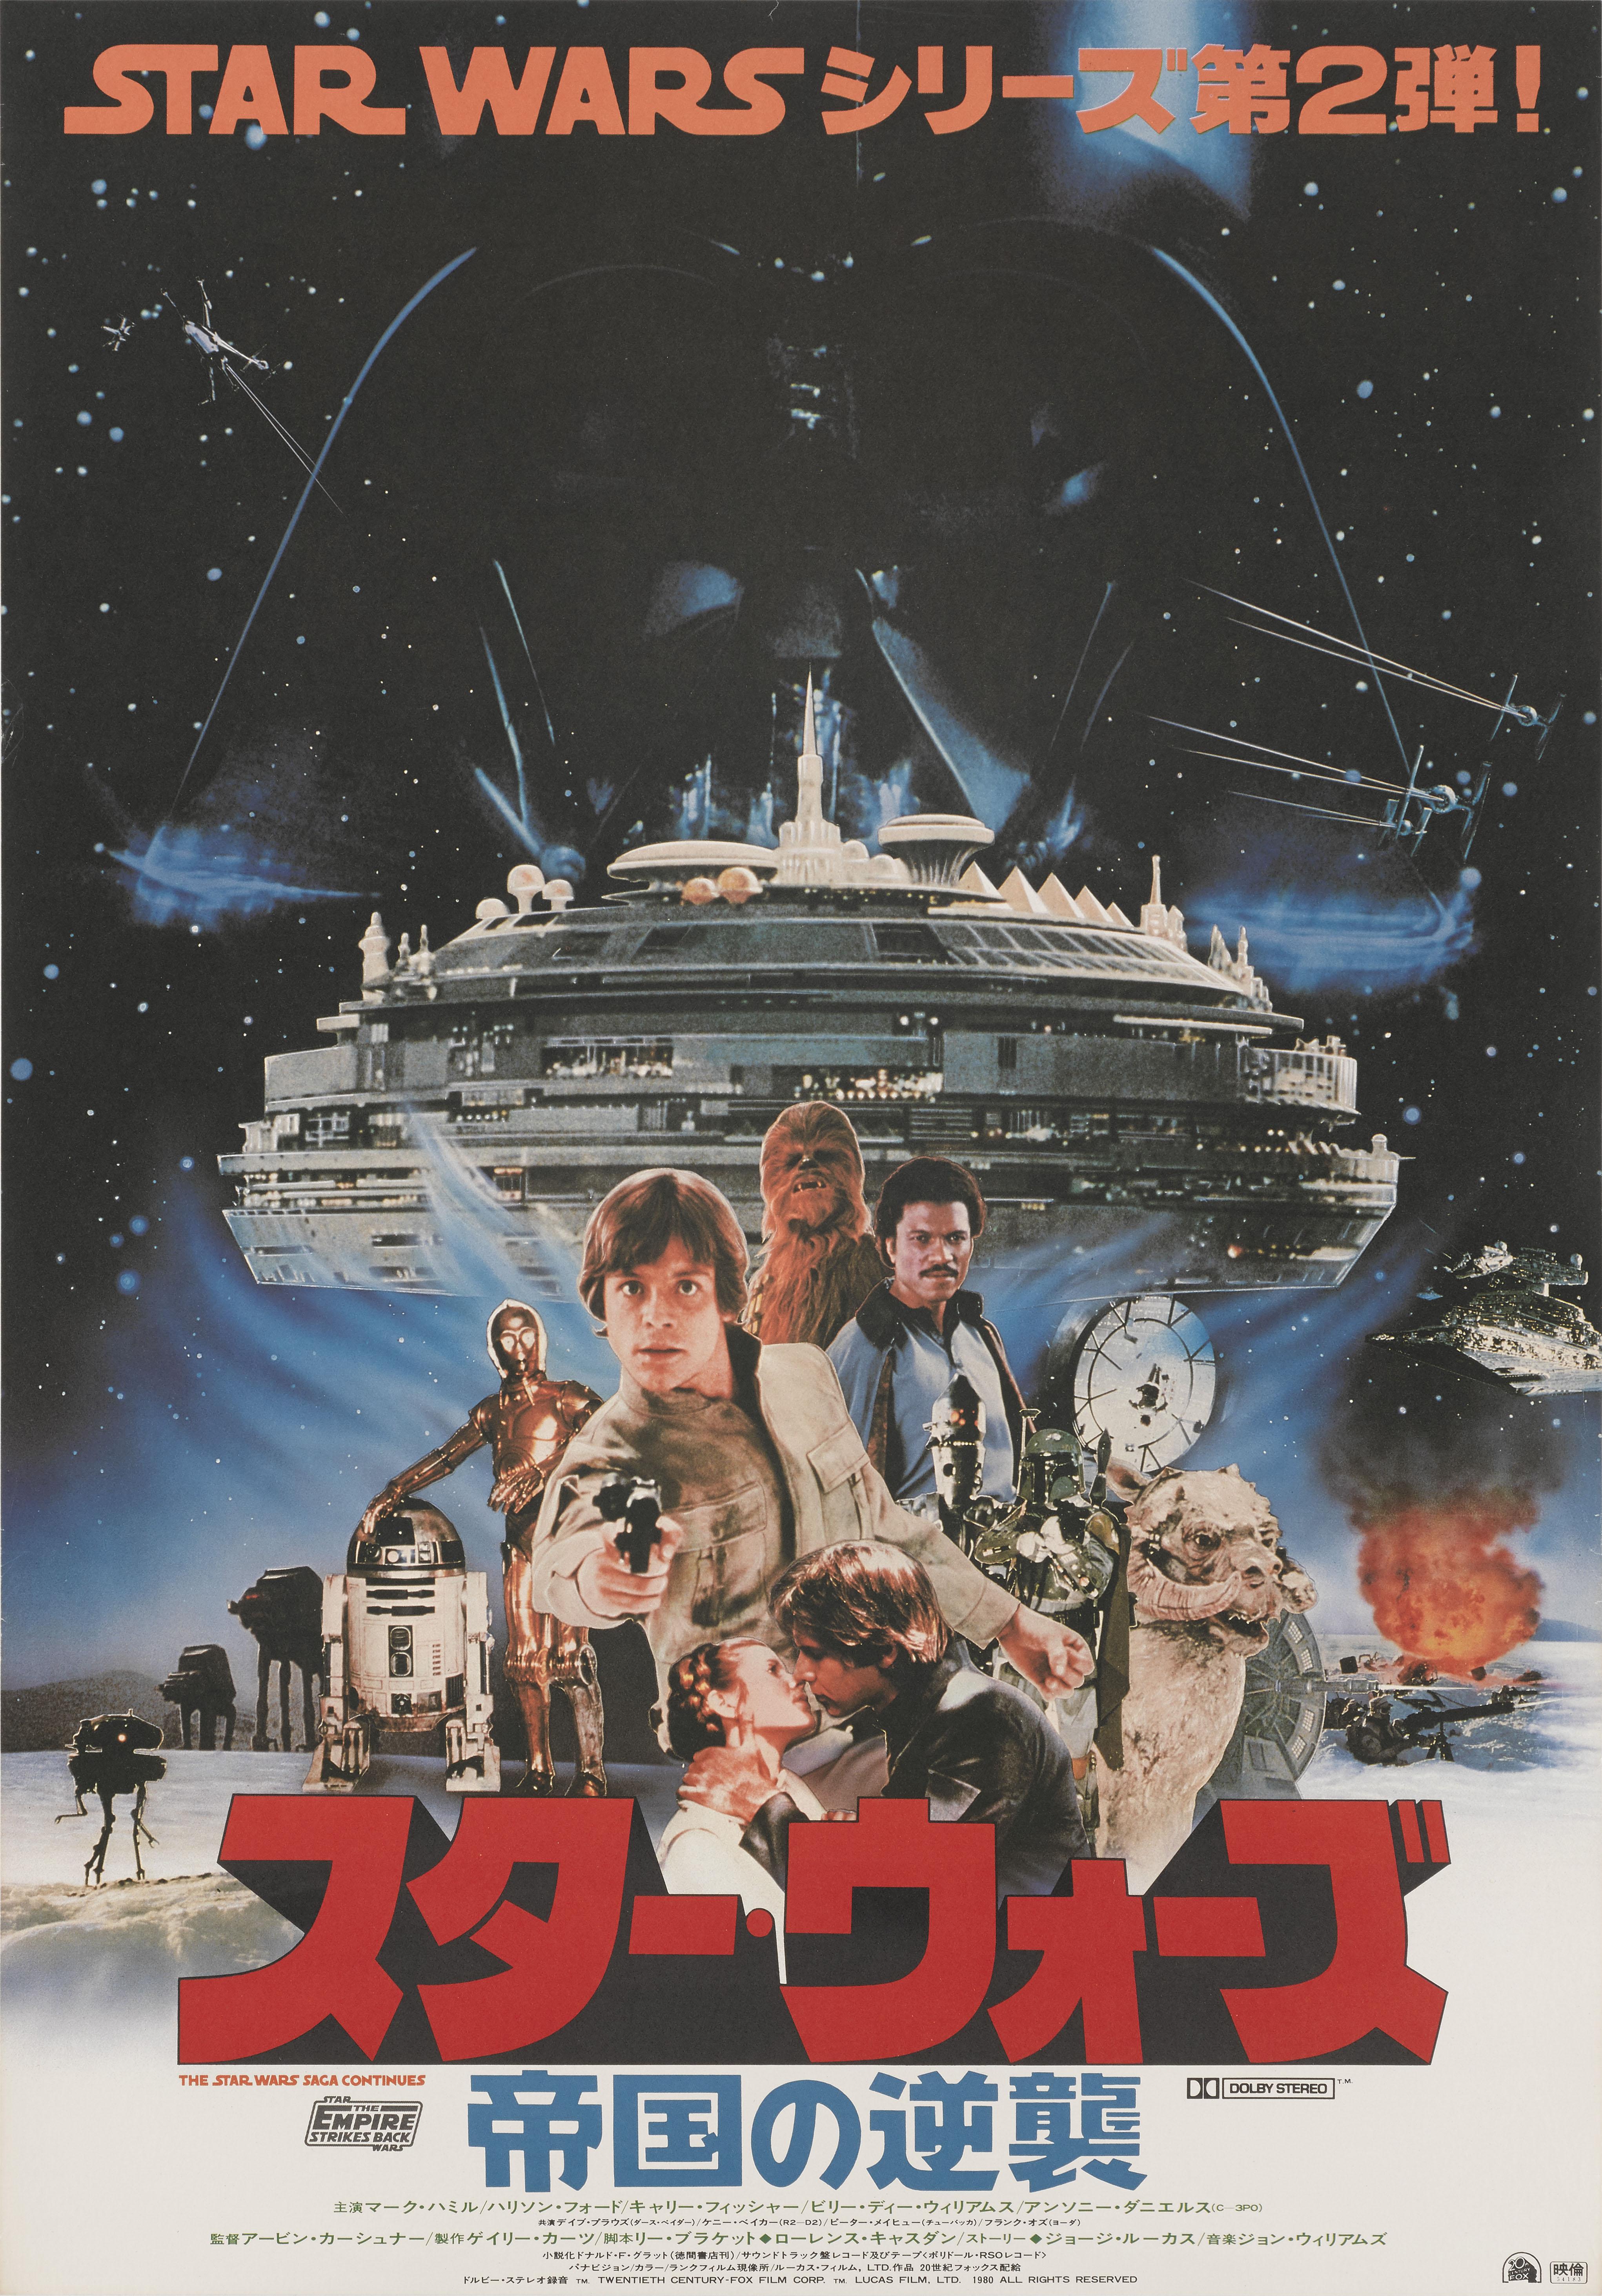 Japanese The Empire Strikes Back For Sale